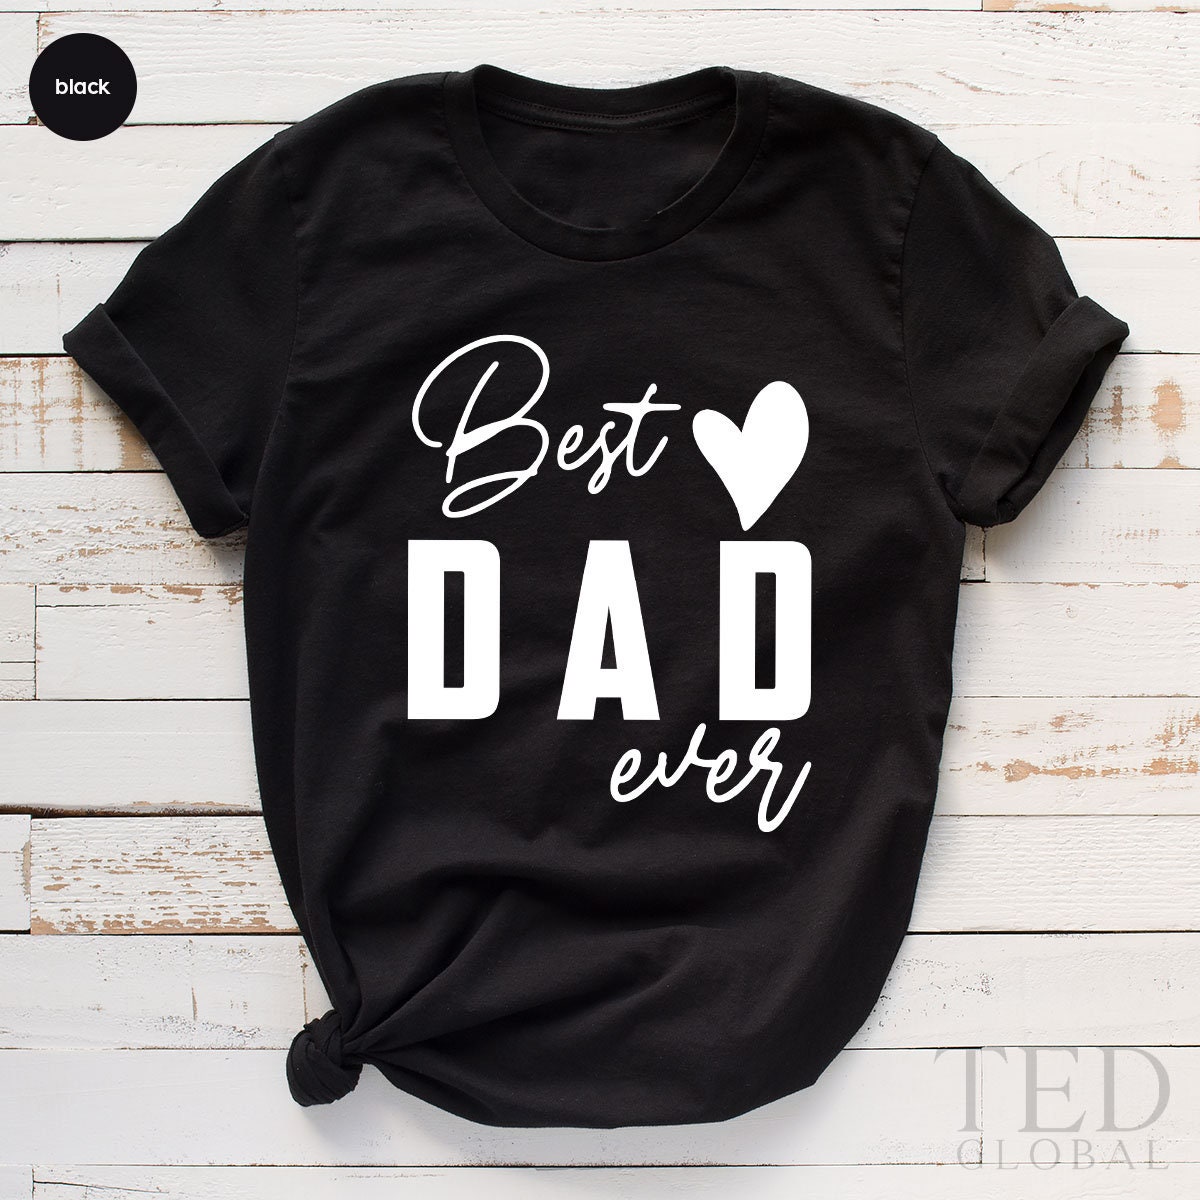 Best Dad Ever Shirt, Grandpa Shirt, Best Dad Shirt, Fathers Day Gifts, Daddy T Shirt, Gift For Dad, Dad Shirt, New Dad Shirt - Fastdeliverytees.com